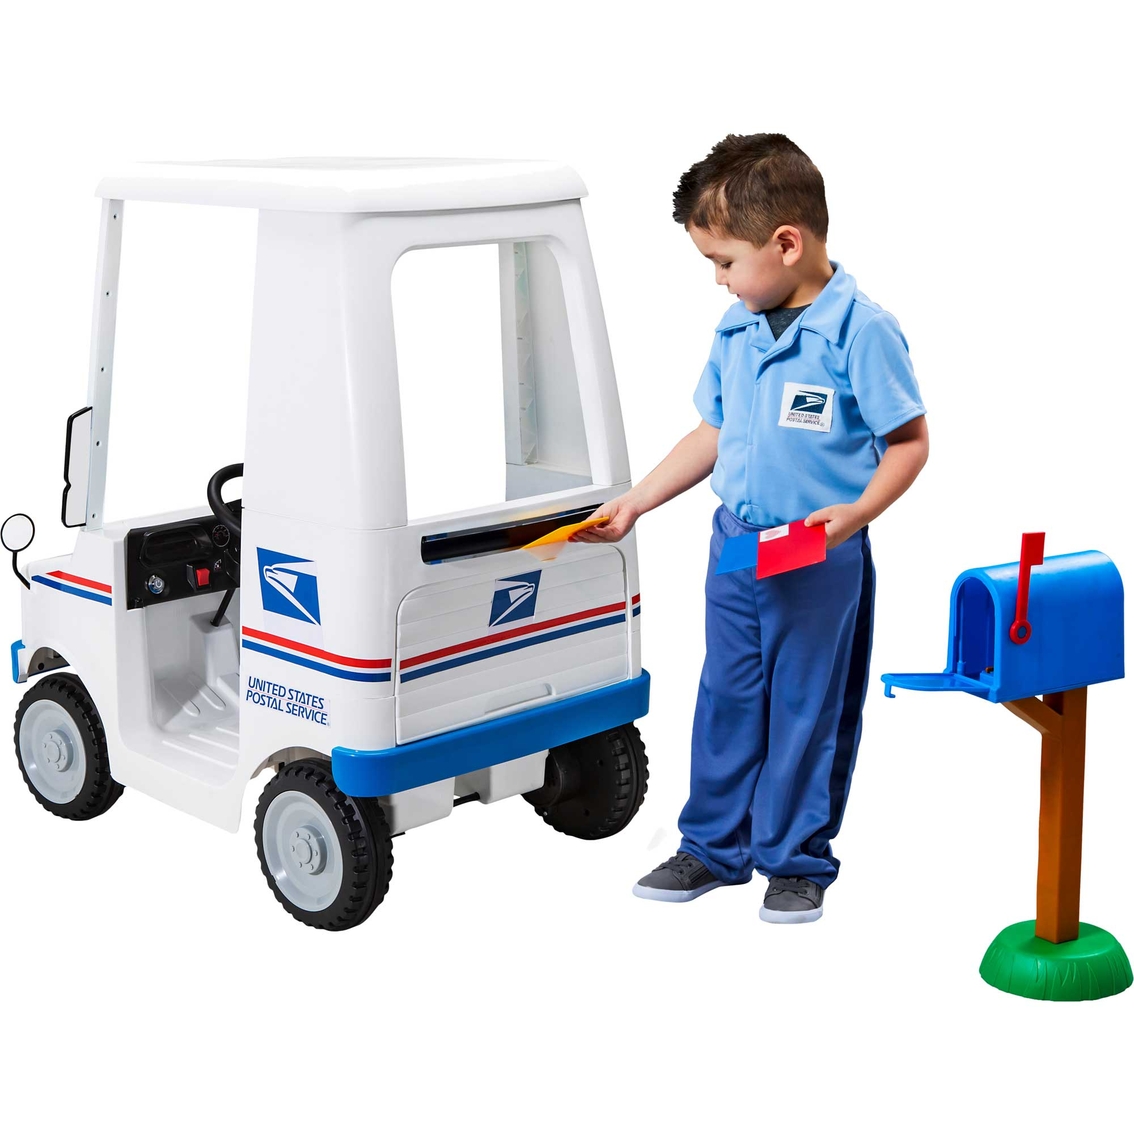 KidTrax US Postal Service 6 Volt Mail Delivery Truck Electric Ride On Toy - Image 2 of 4